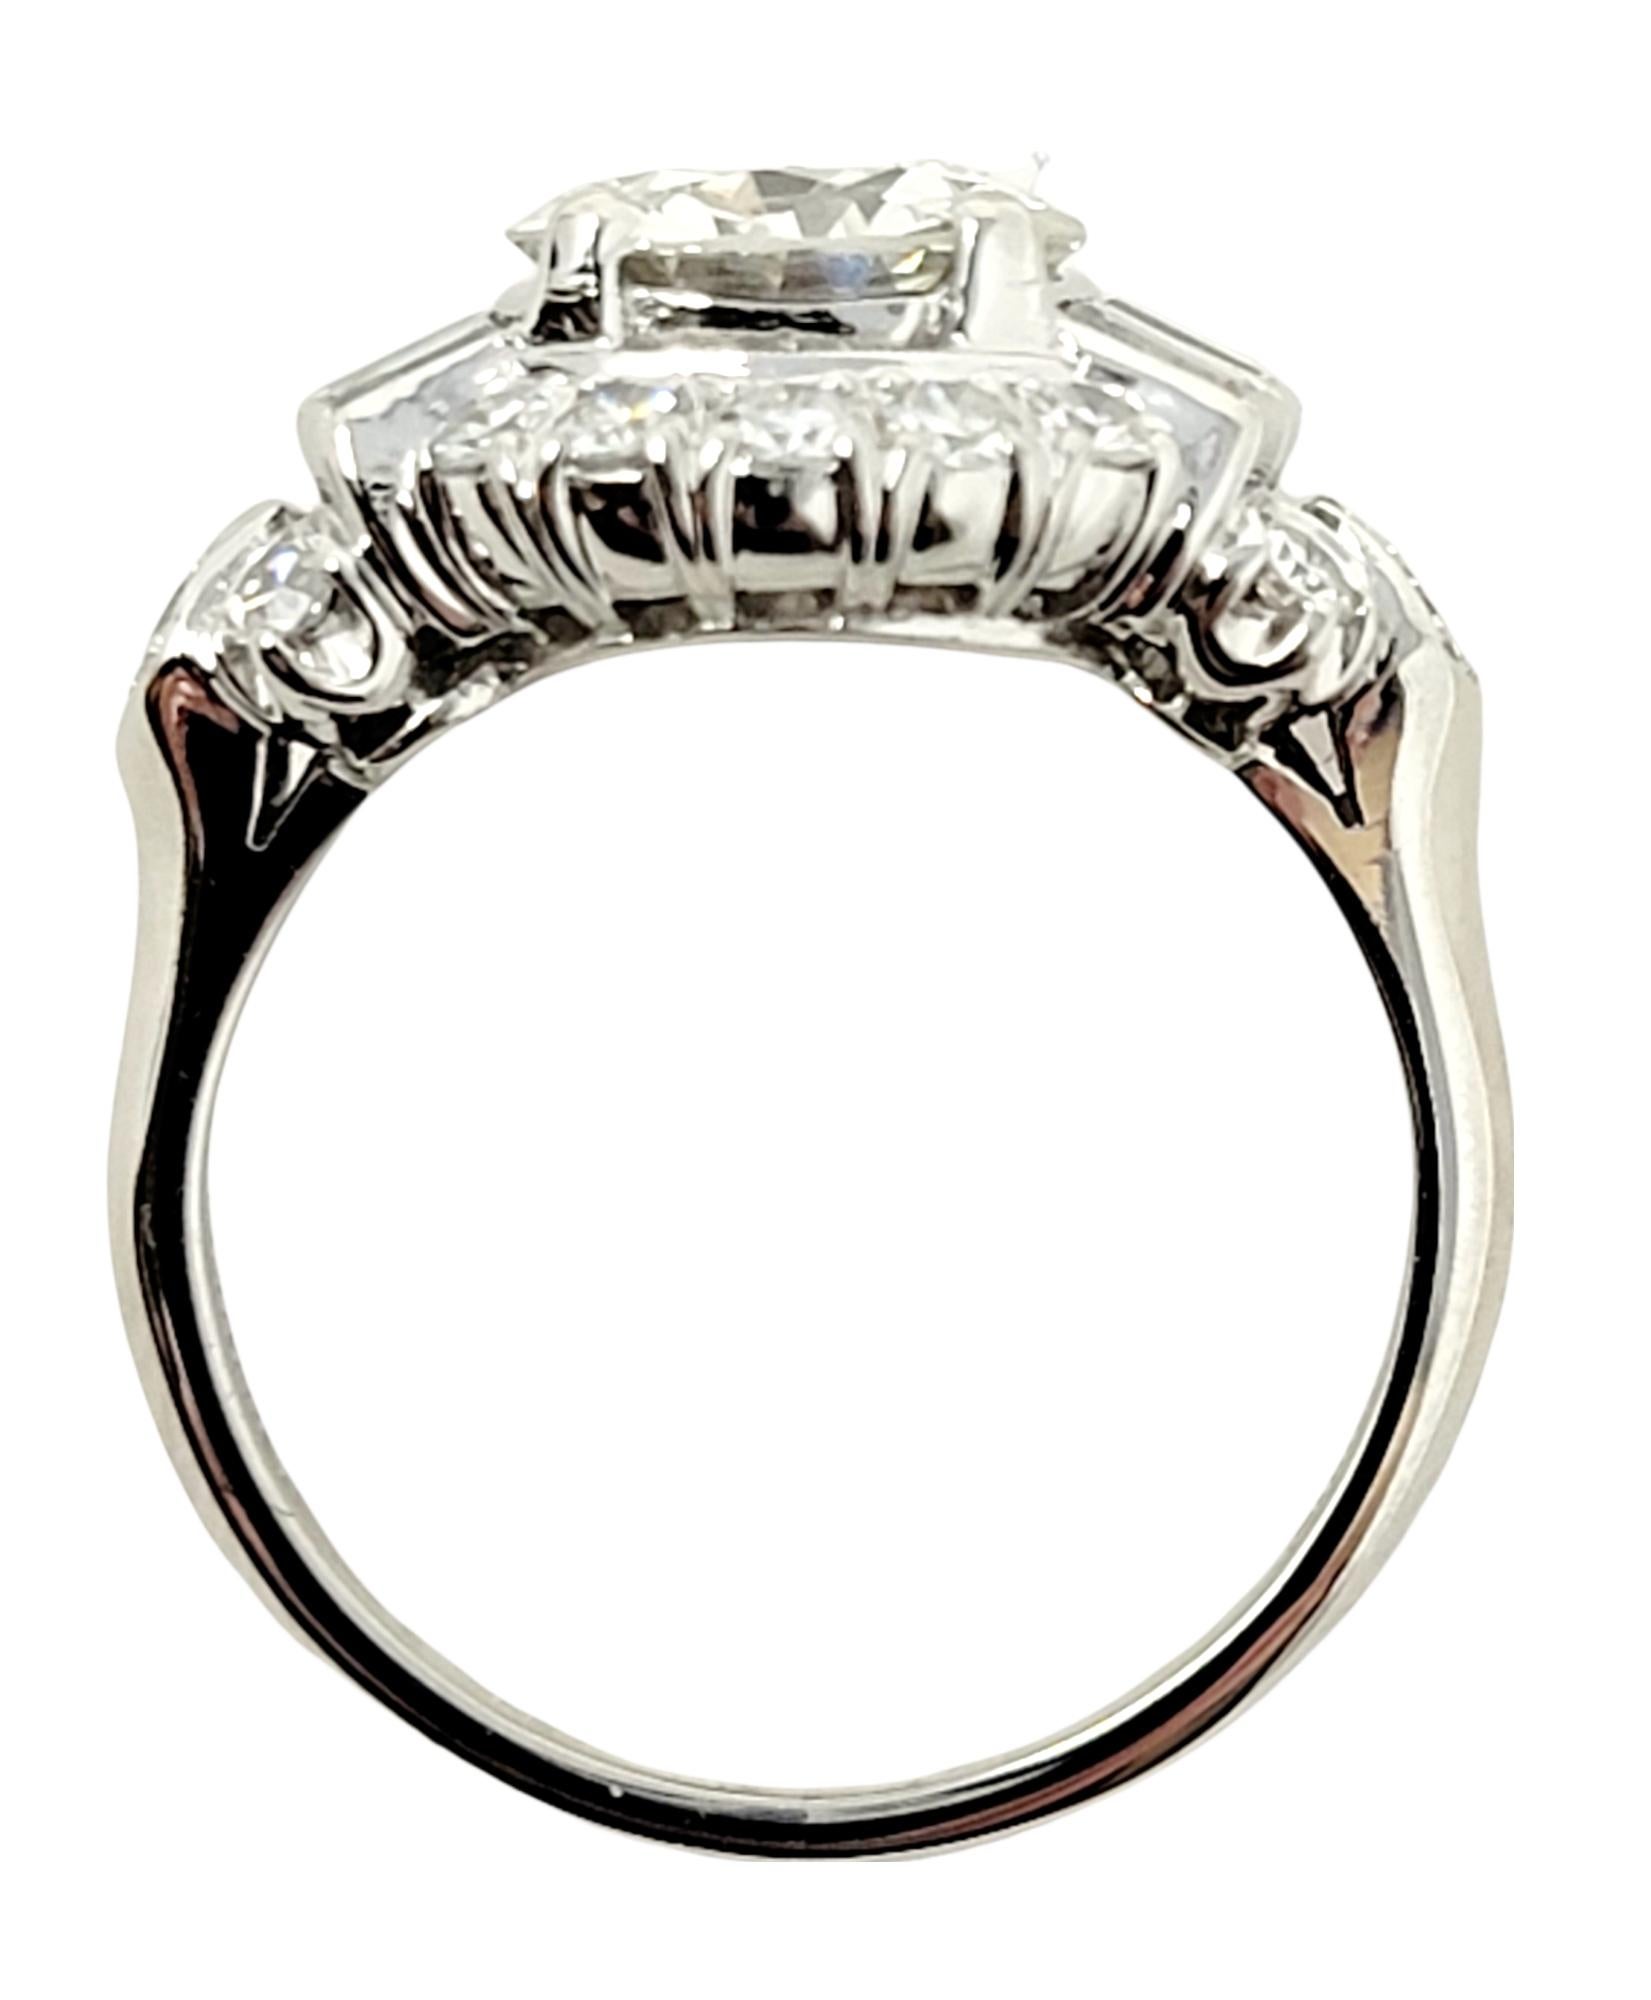 Vintage Granat Brothers Old European Cut Diamond and Platinum Engagement Ring  In Good Condition For Sale In Scottsdale, AZ